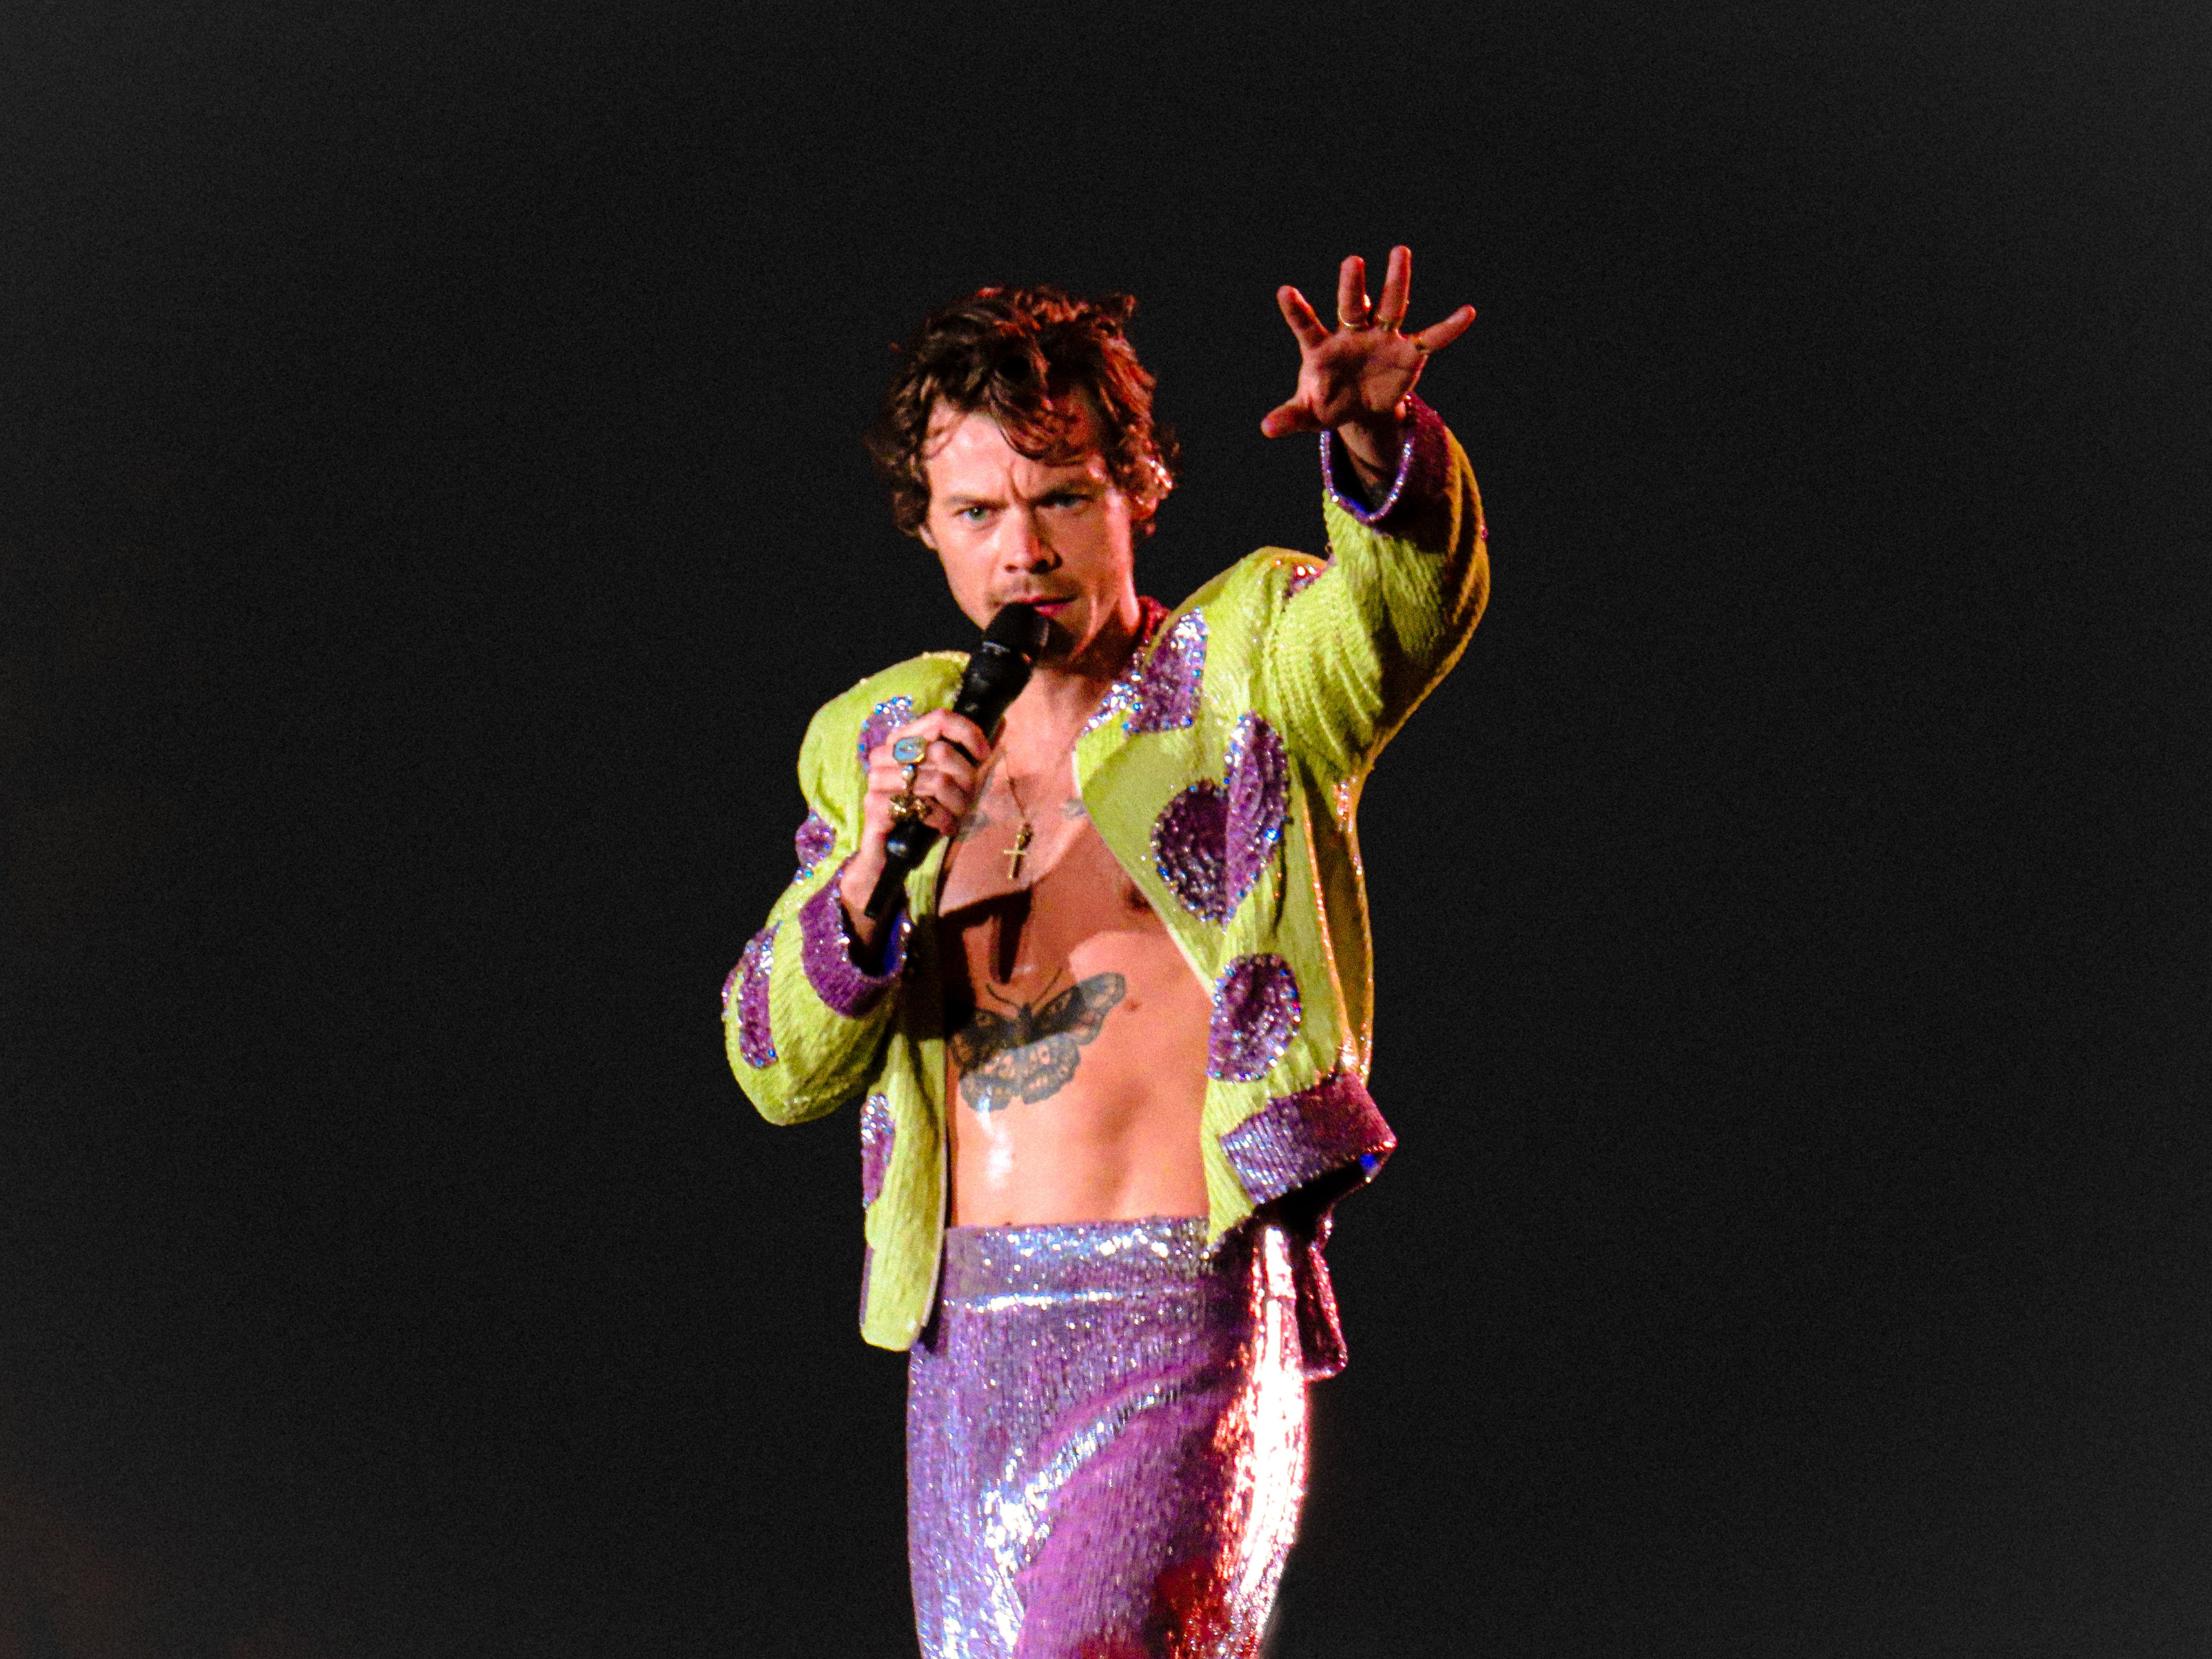 Harry Styles wearing a purple and yellow outfit performing at a concert